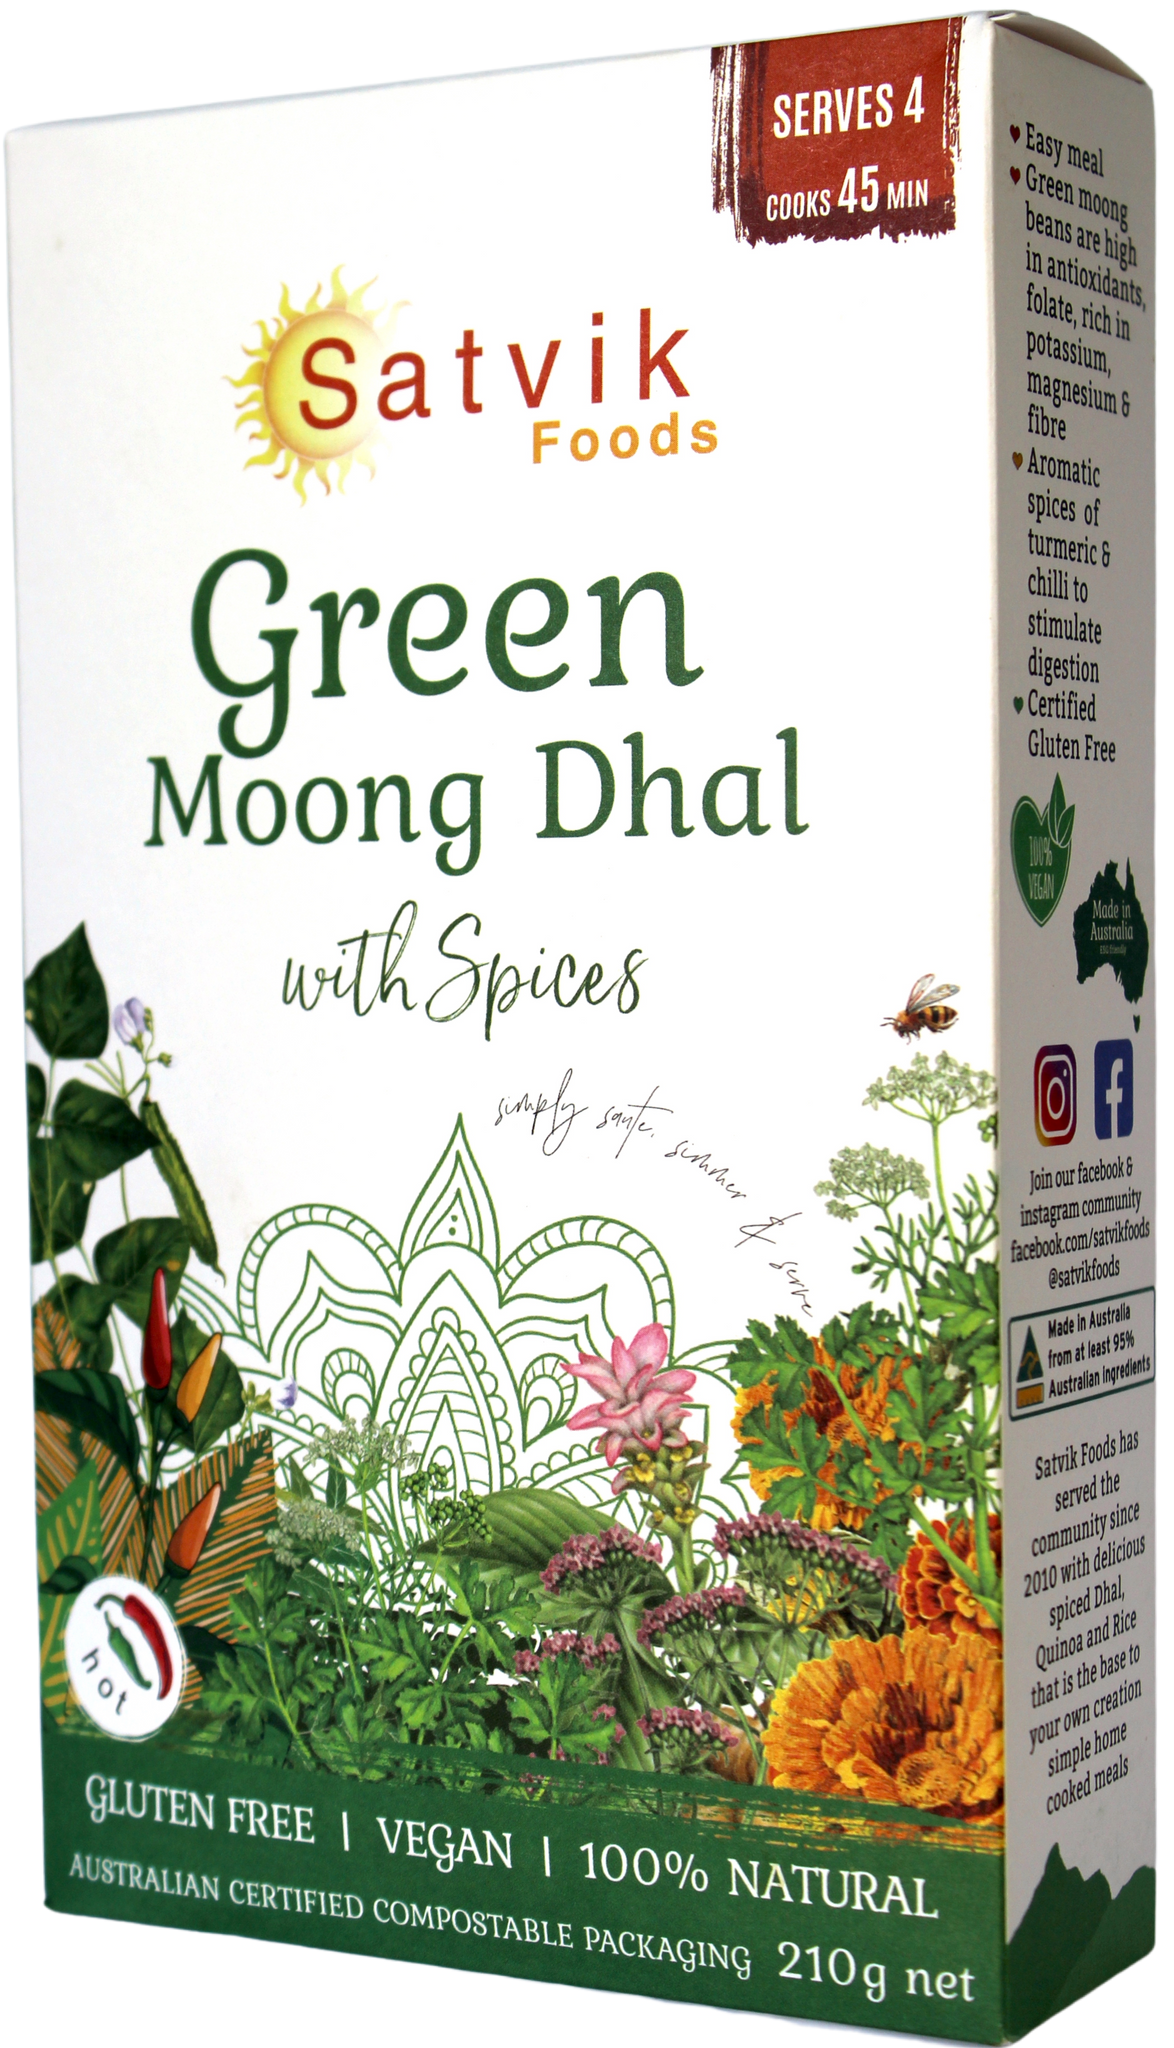 clean eating is delicious with our green moong dhal make at home packs. ready in minutes 